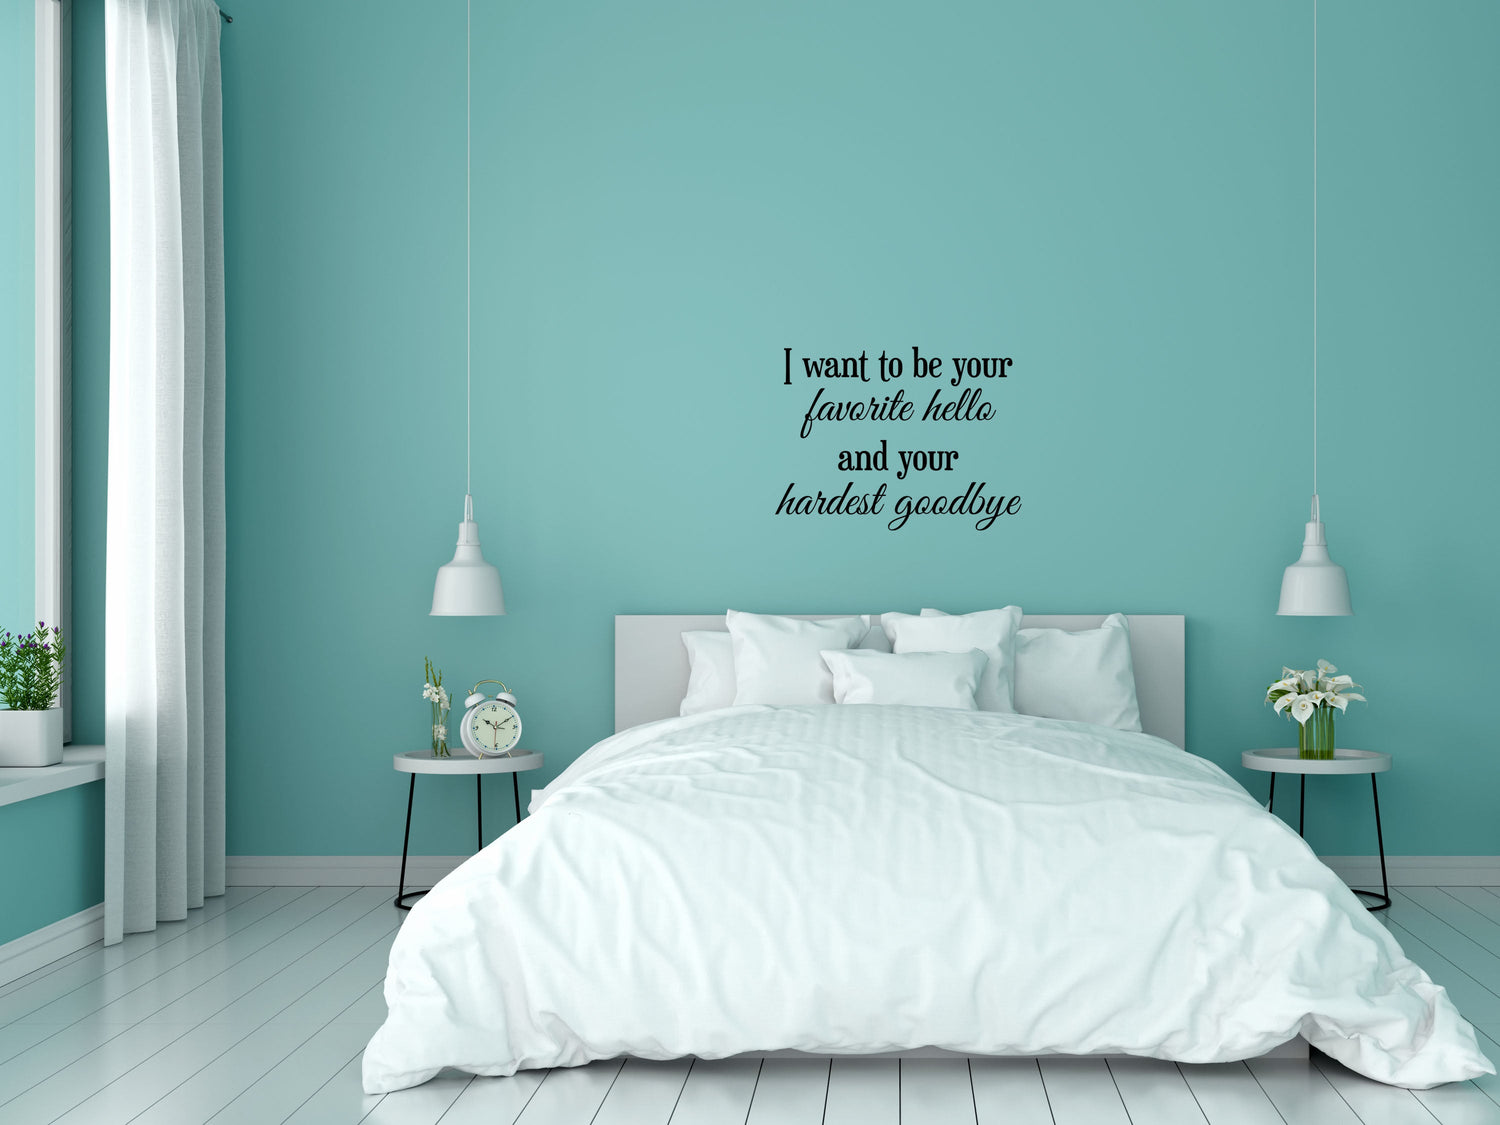 I want to be Your Favorite Hello Quote Sticker - Inspirational Wall Decals Home Decor Decals Inspirational Wall Signs 